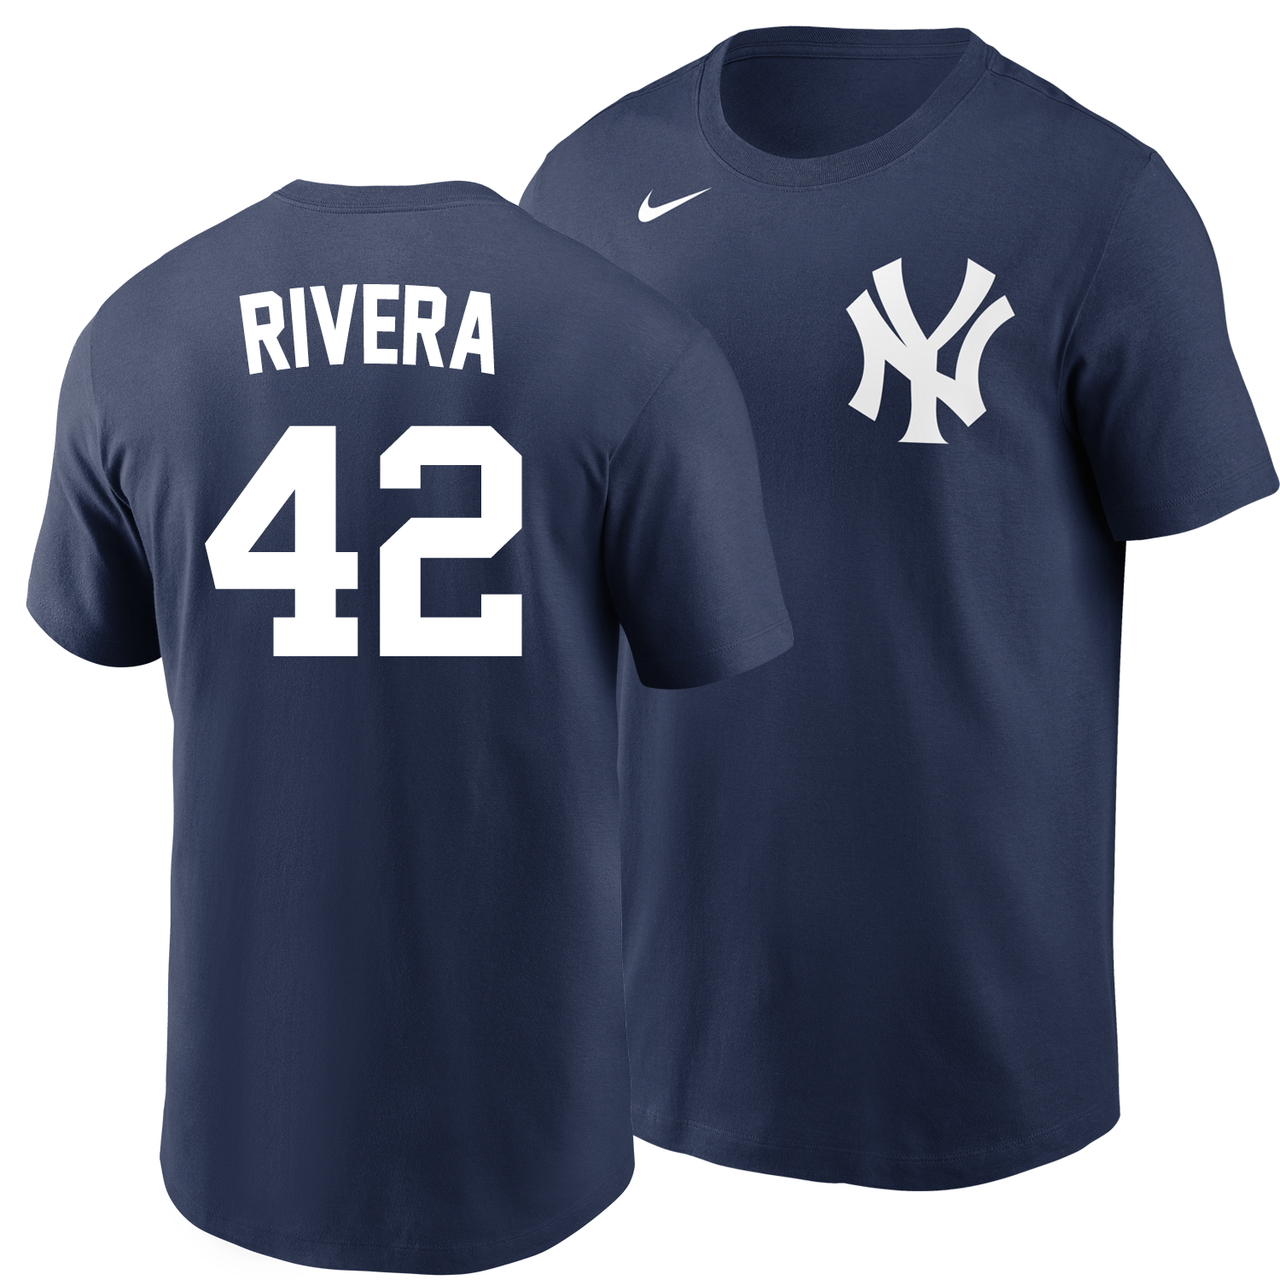 Yankees Mariano Rivera Name and Number Youth Tee